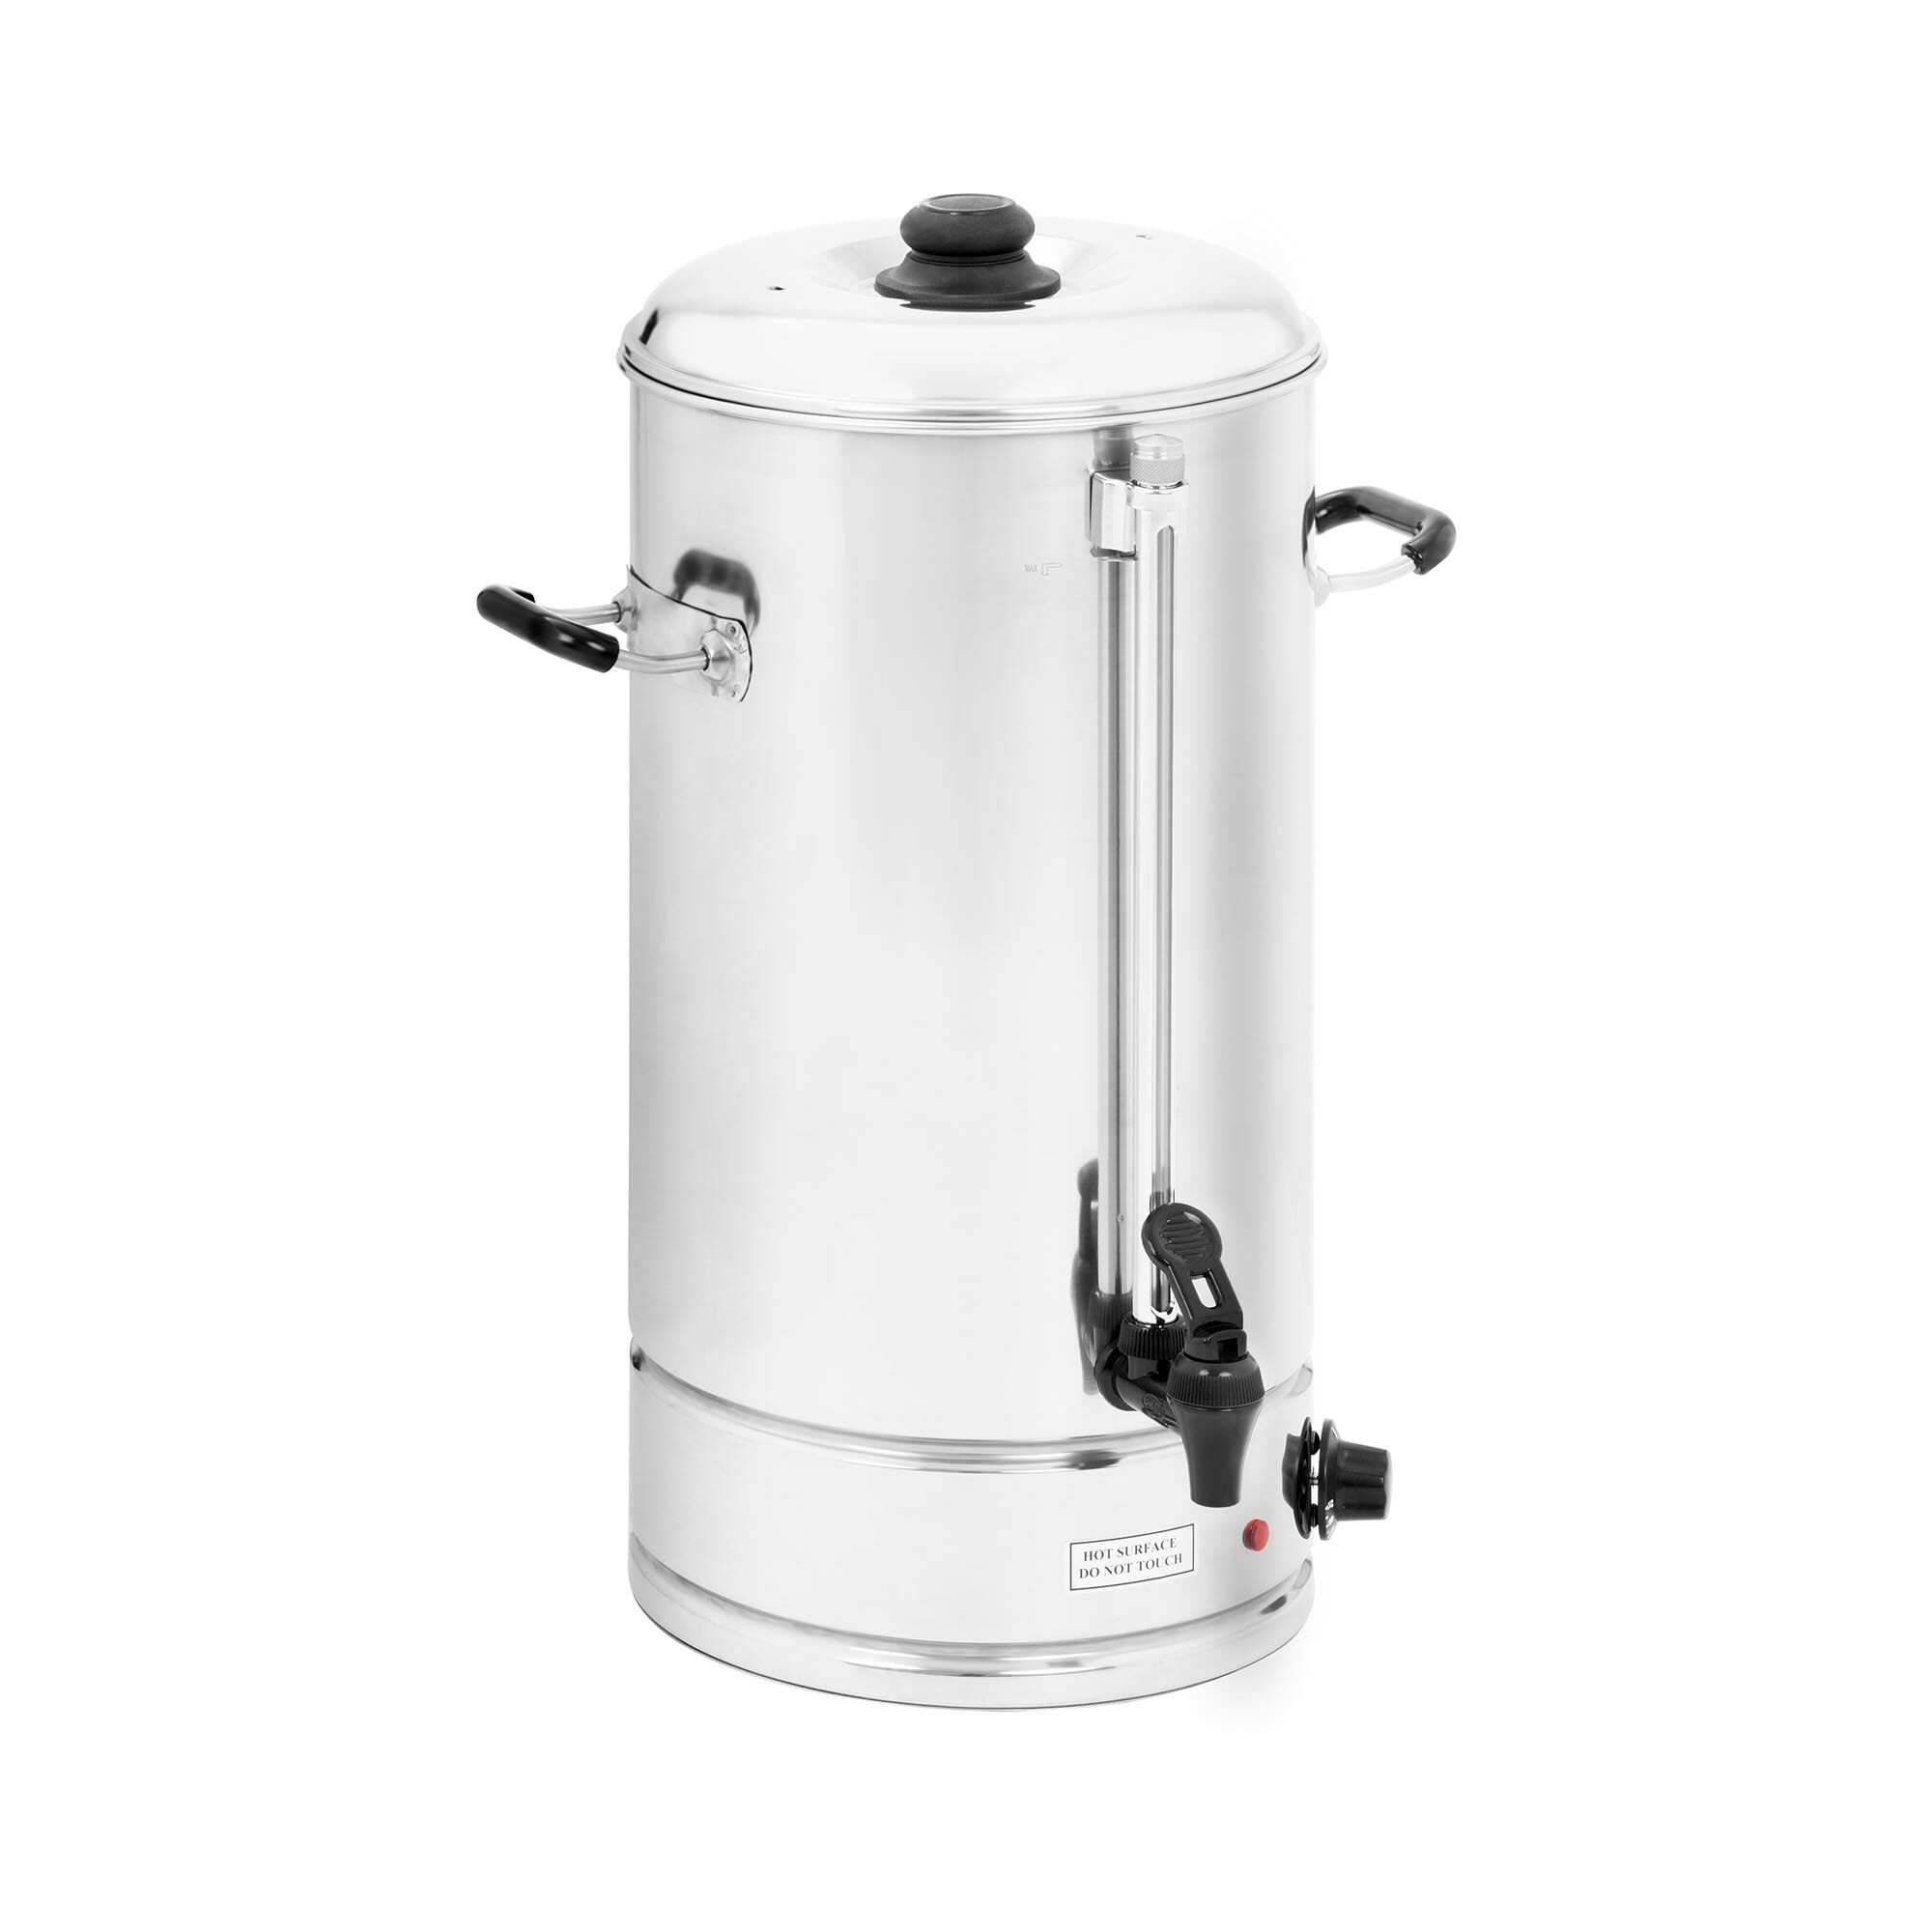 Royal Catering Hot Water Dispenser - 20 litres - 2,500 W RCWK-20L